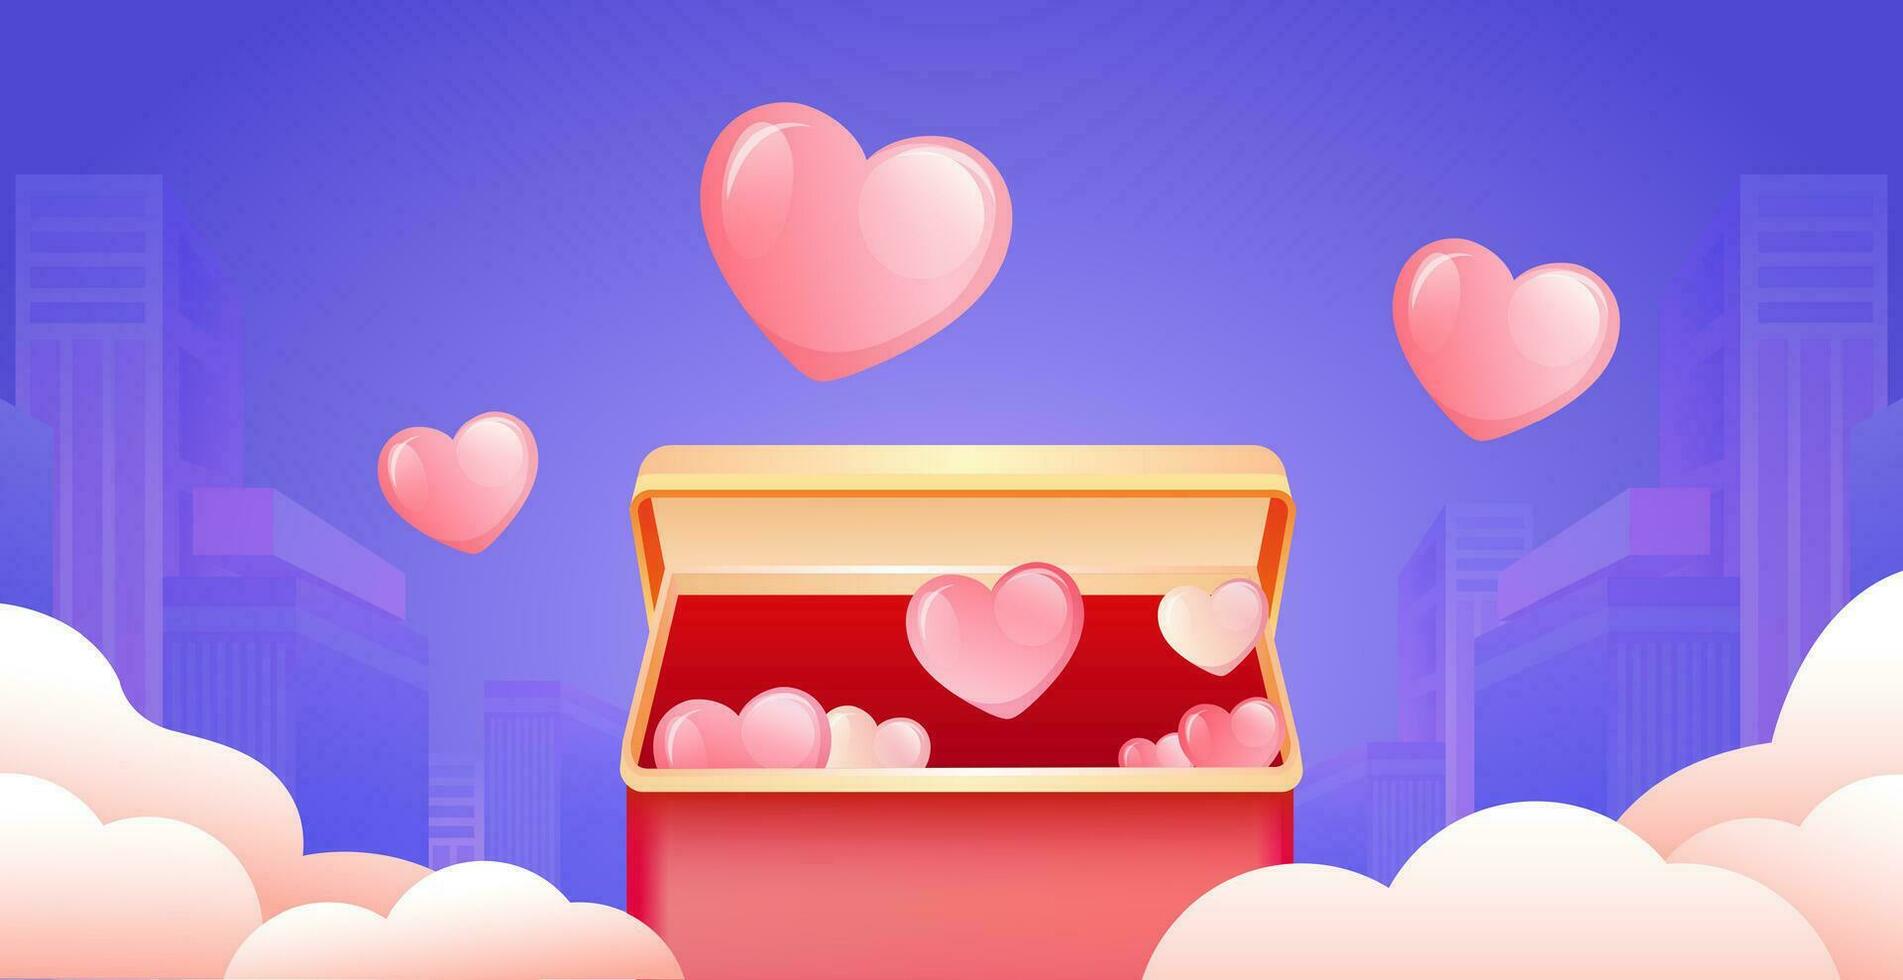 City of love, the gift box opens to reveal a heart flying in the romantic city sky vector